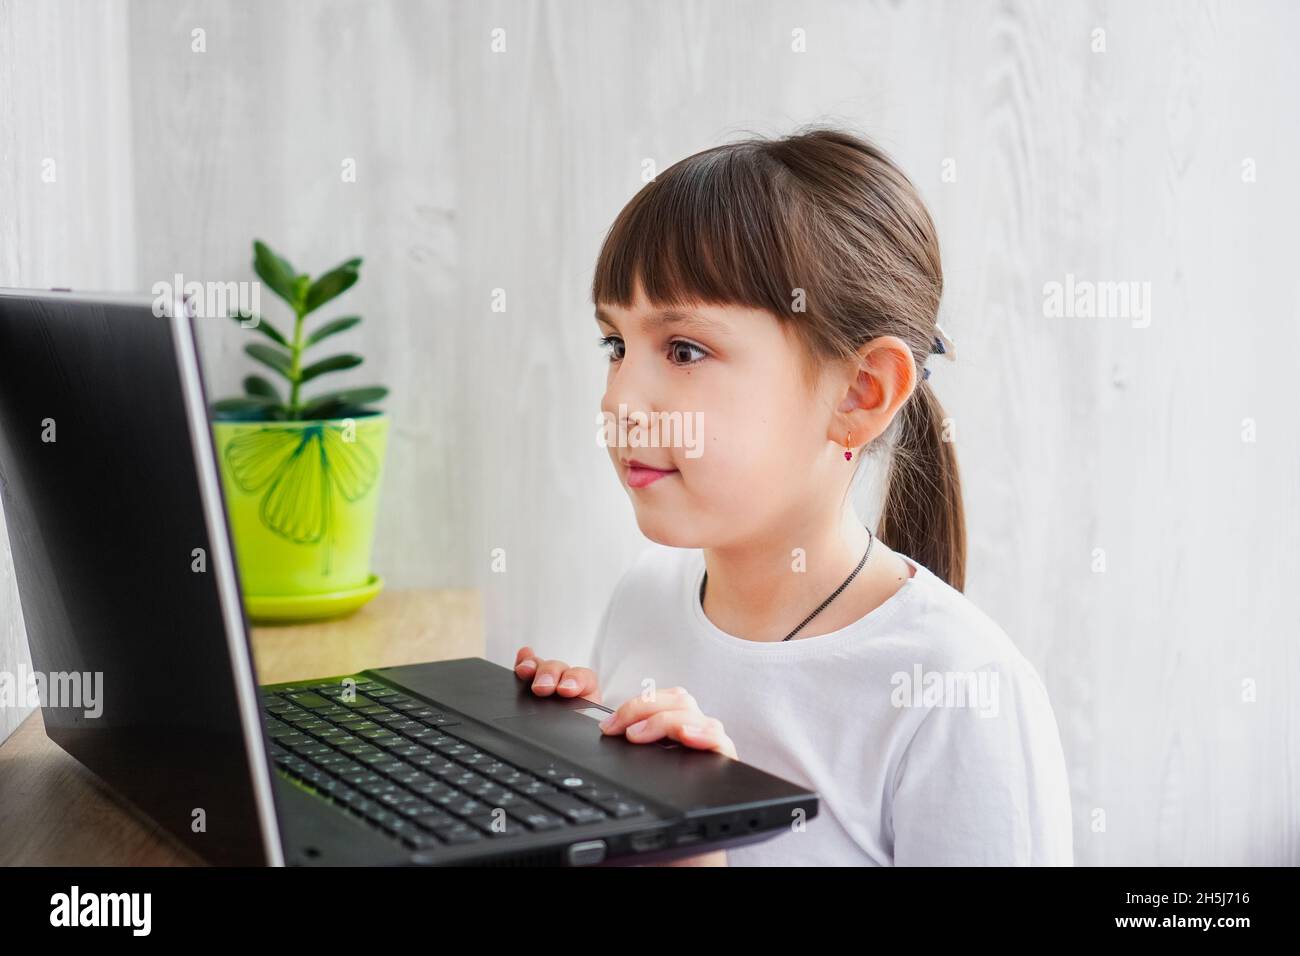 Indoor shot of cute dark haired female child looking at notebook very carefully. Stock Photo